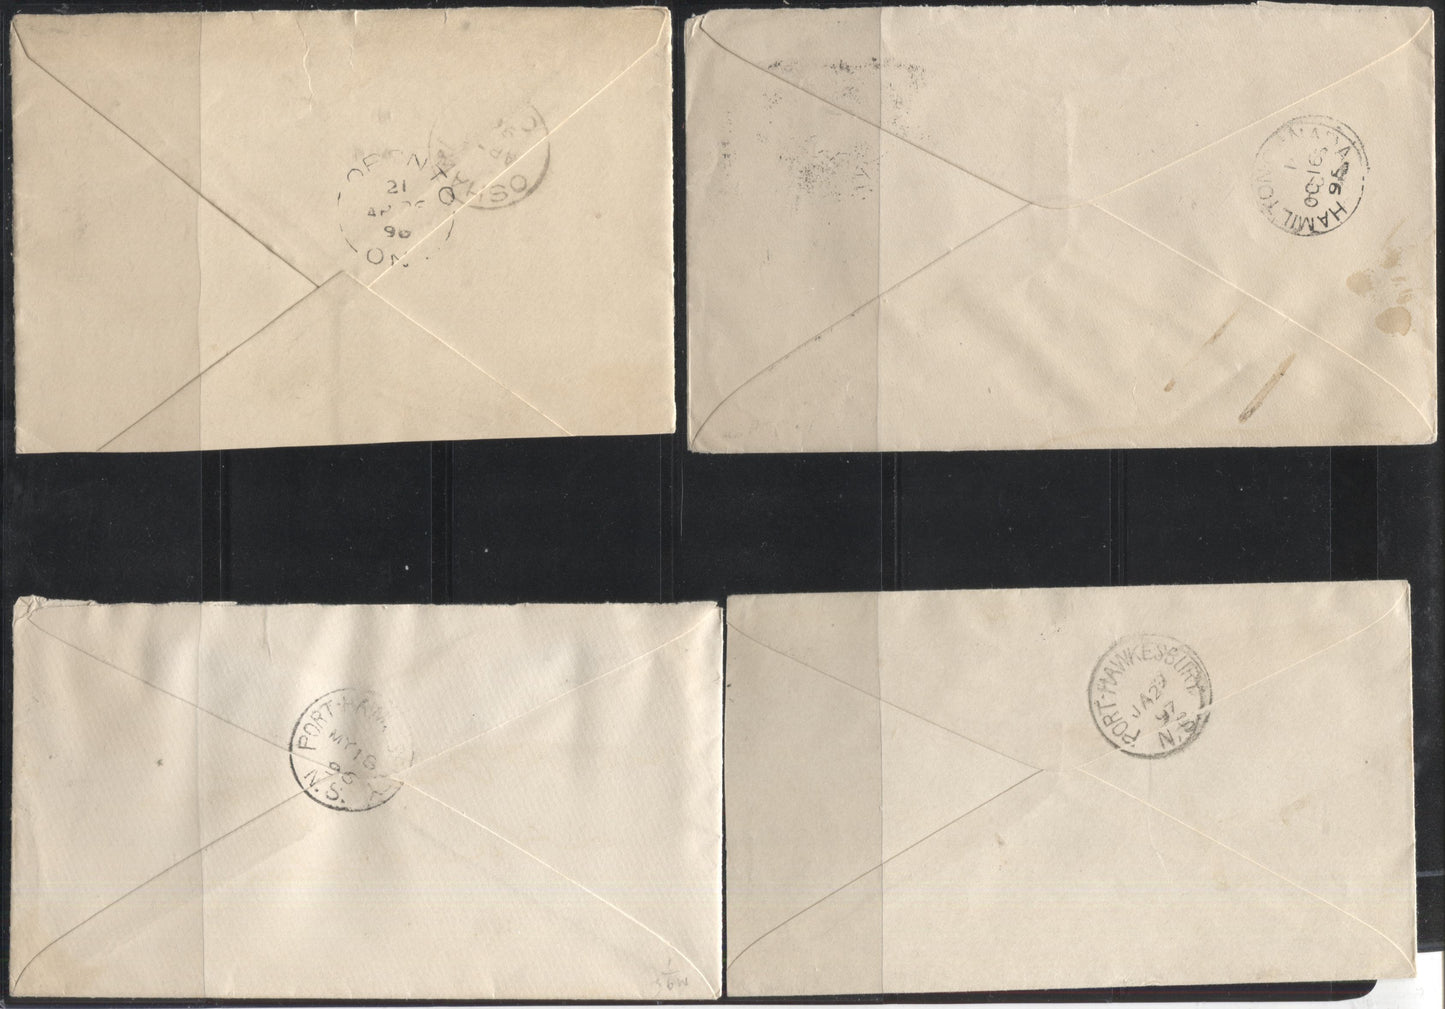 Lot 233 Canada #41 3c  Queen Victoria, 1870-1897 Small Queen Issue, Four Fine and VF Single Franking Covers, All Franked With Second Ottawa Printings